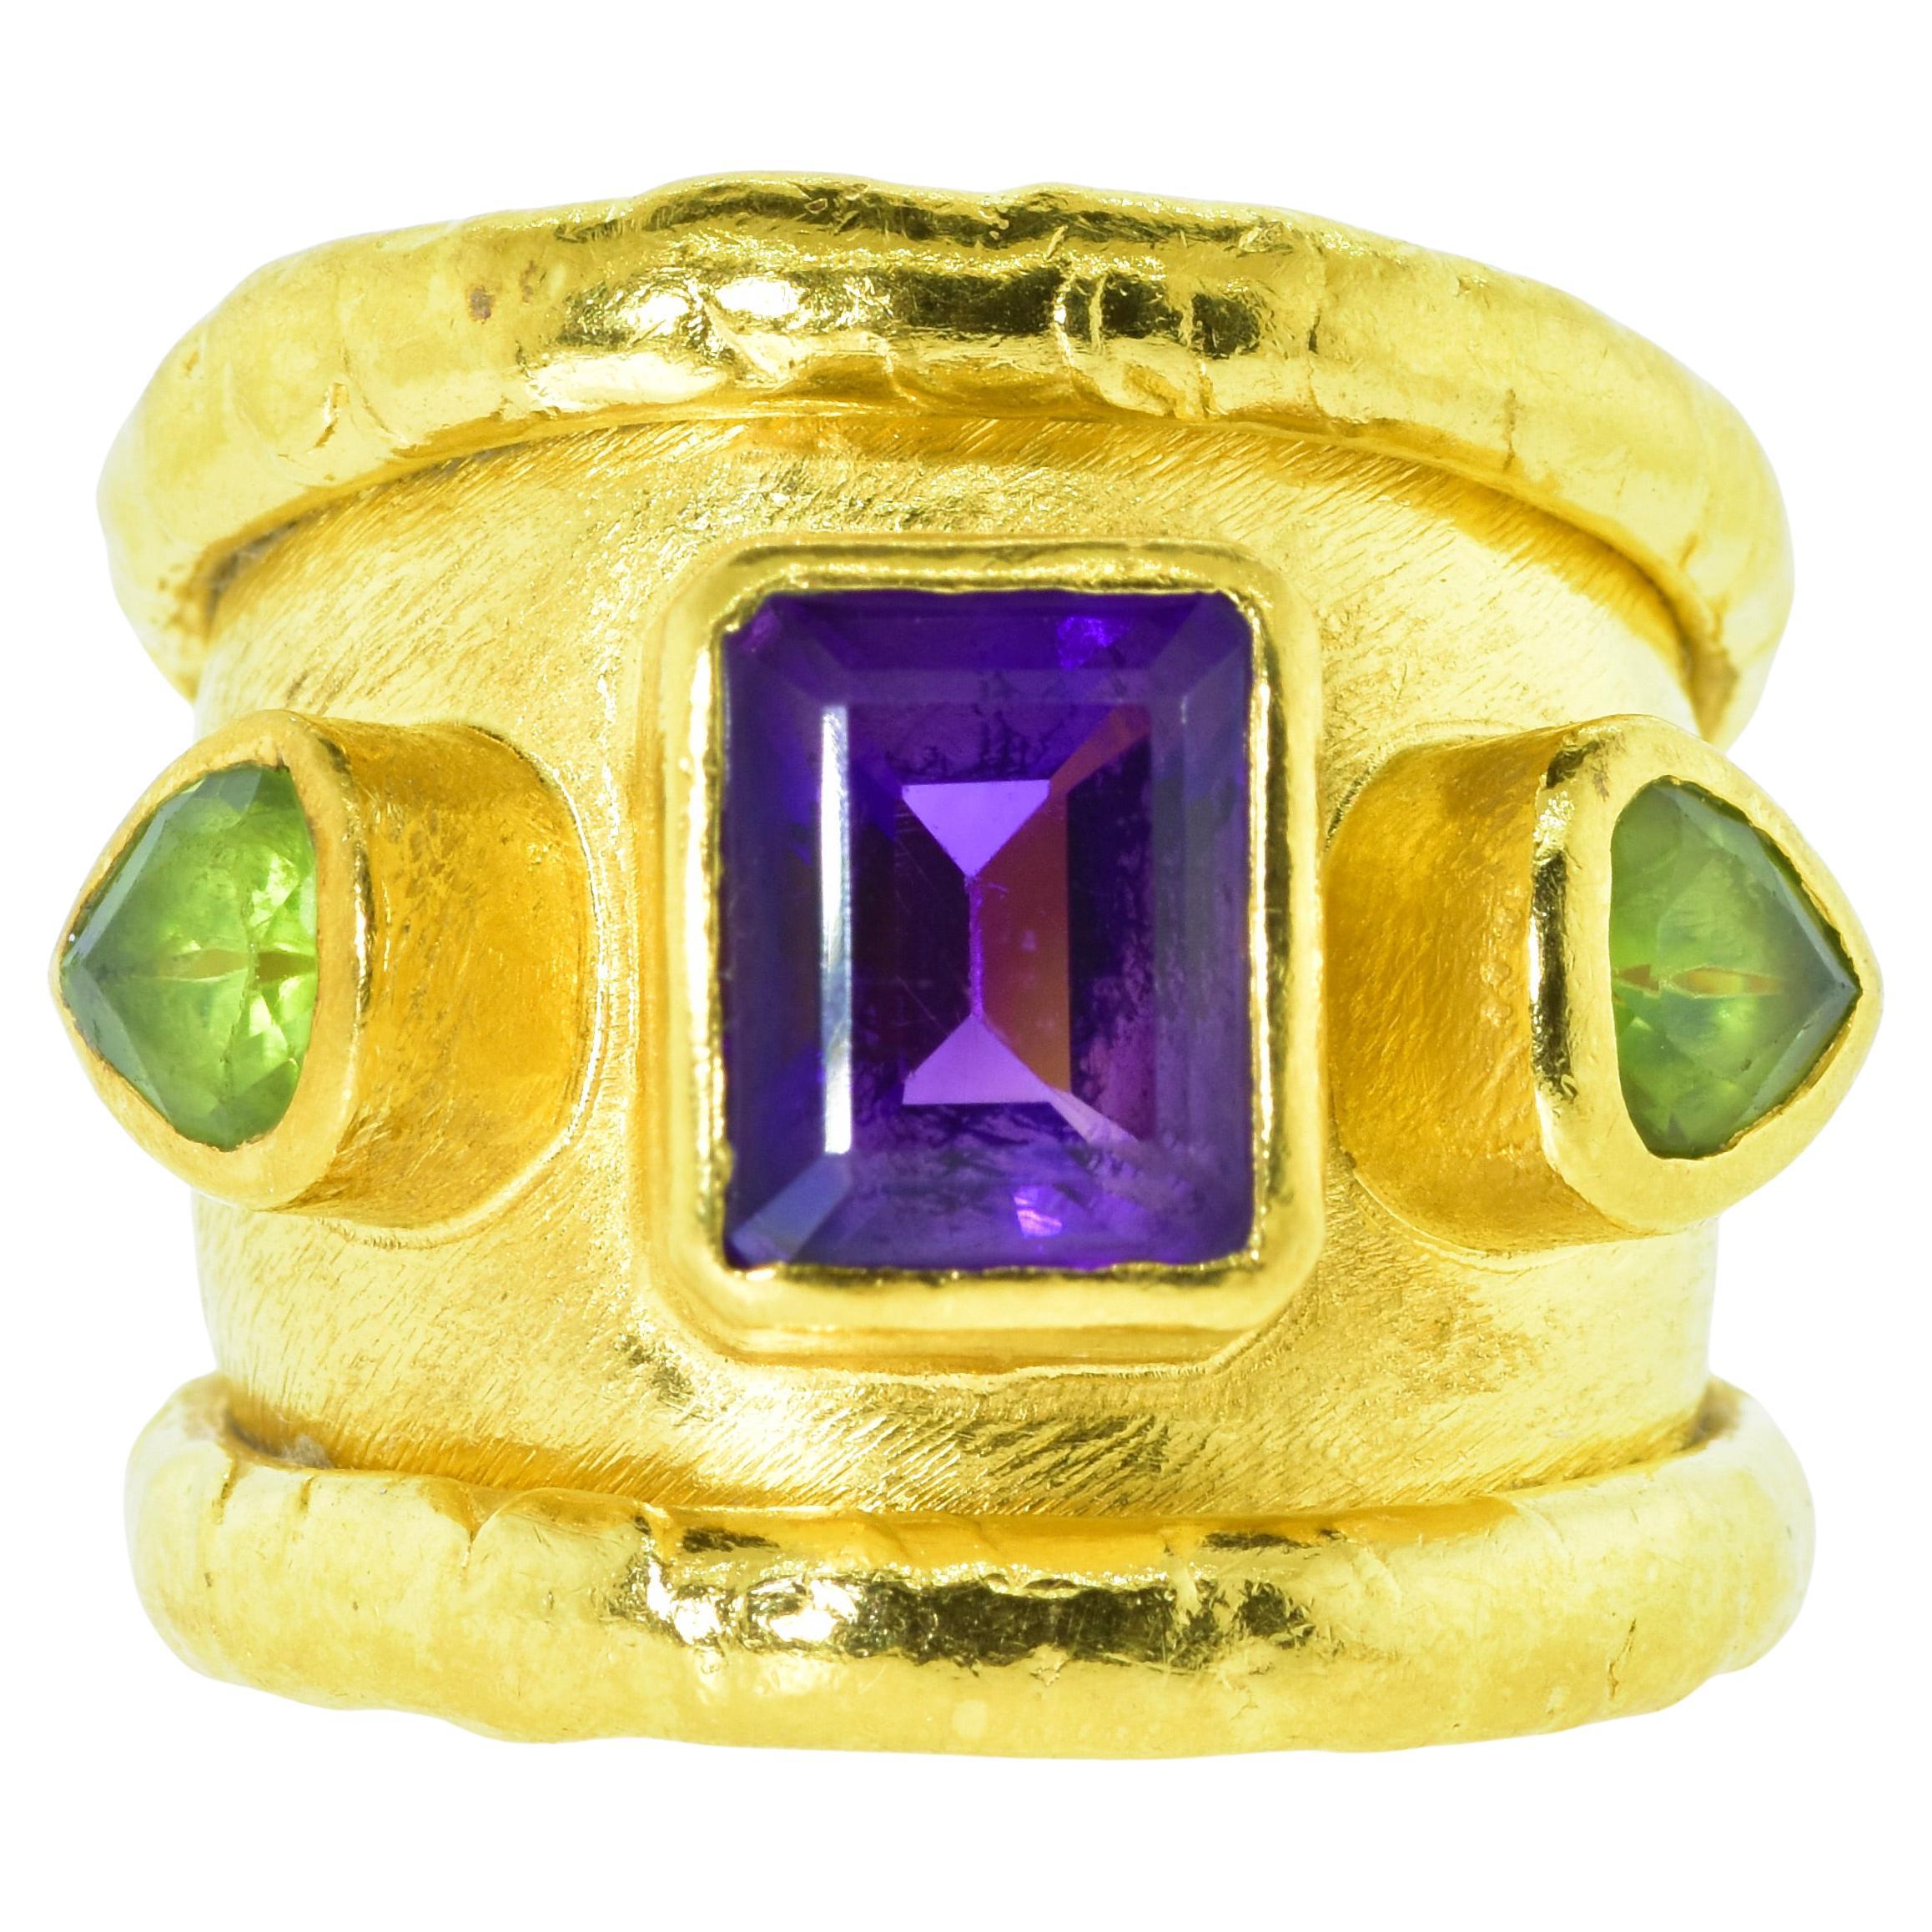 Jean Mahie 22K Gold Ring with Fine Amethyst and Peridot, French, C. 1990